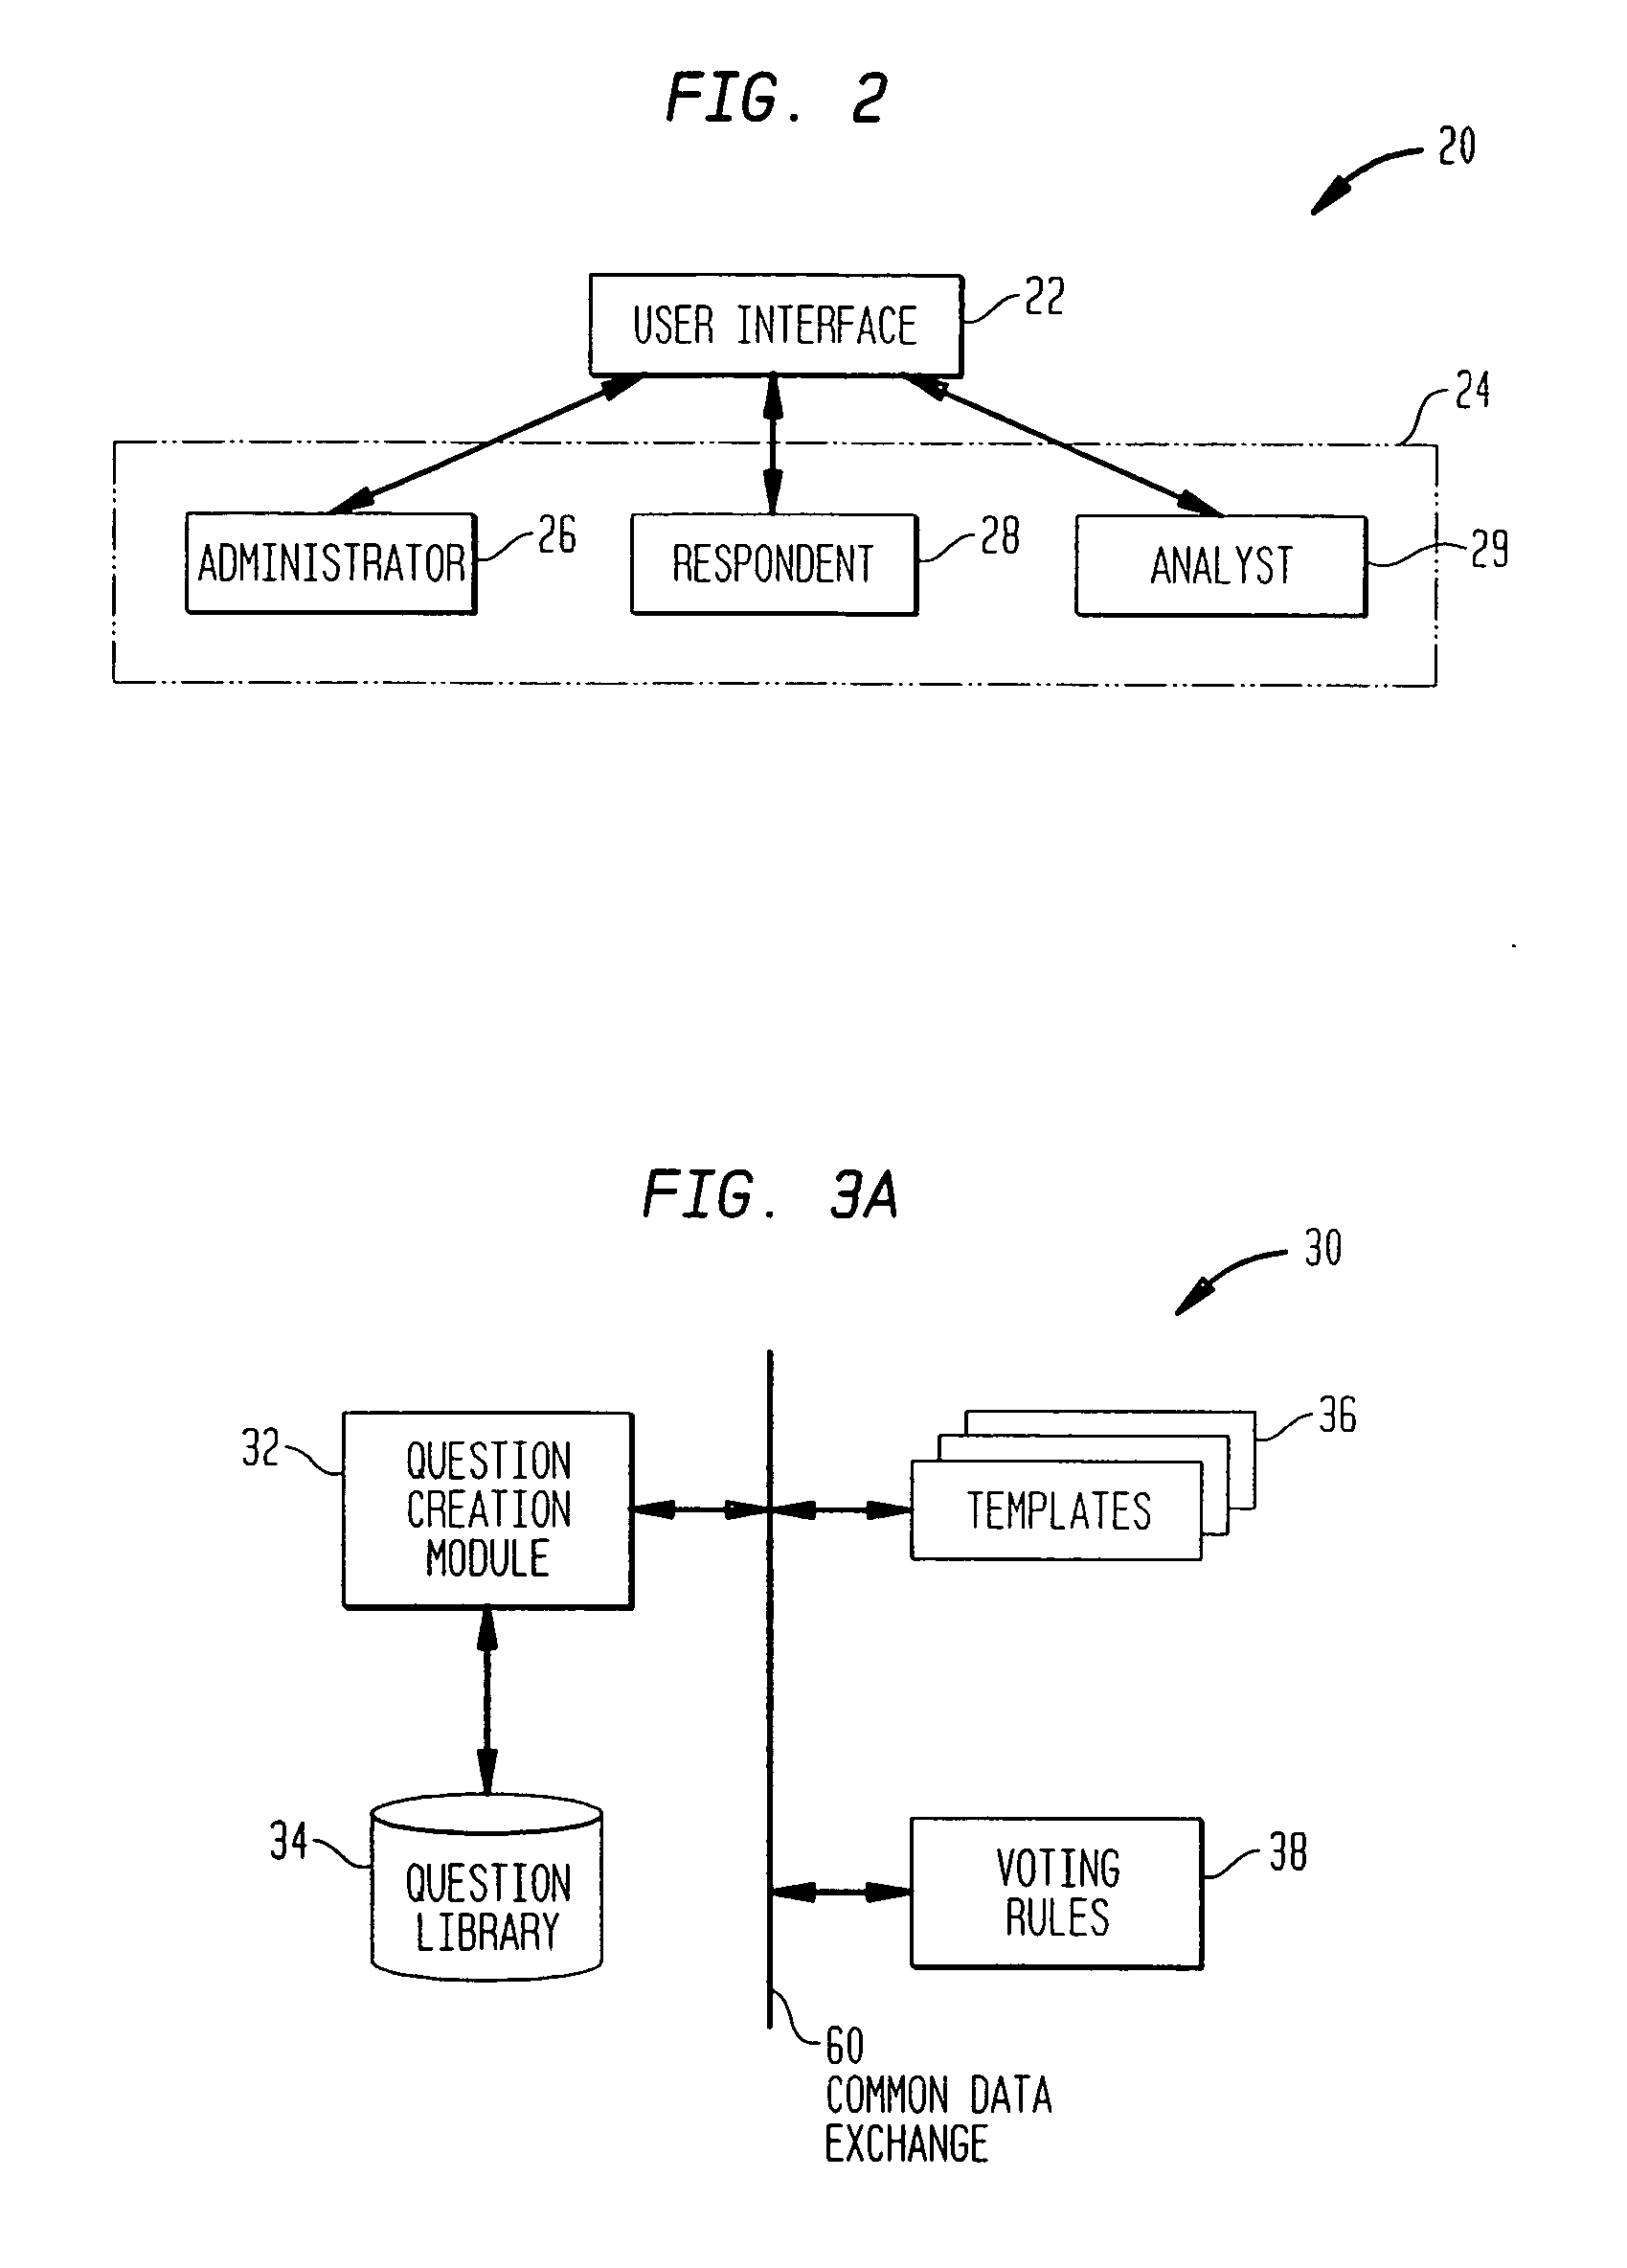 System and method for overcoming decision making and communications errors to produce expedited and accurate group choices